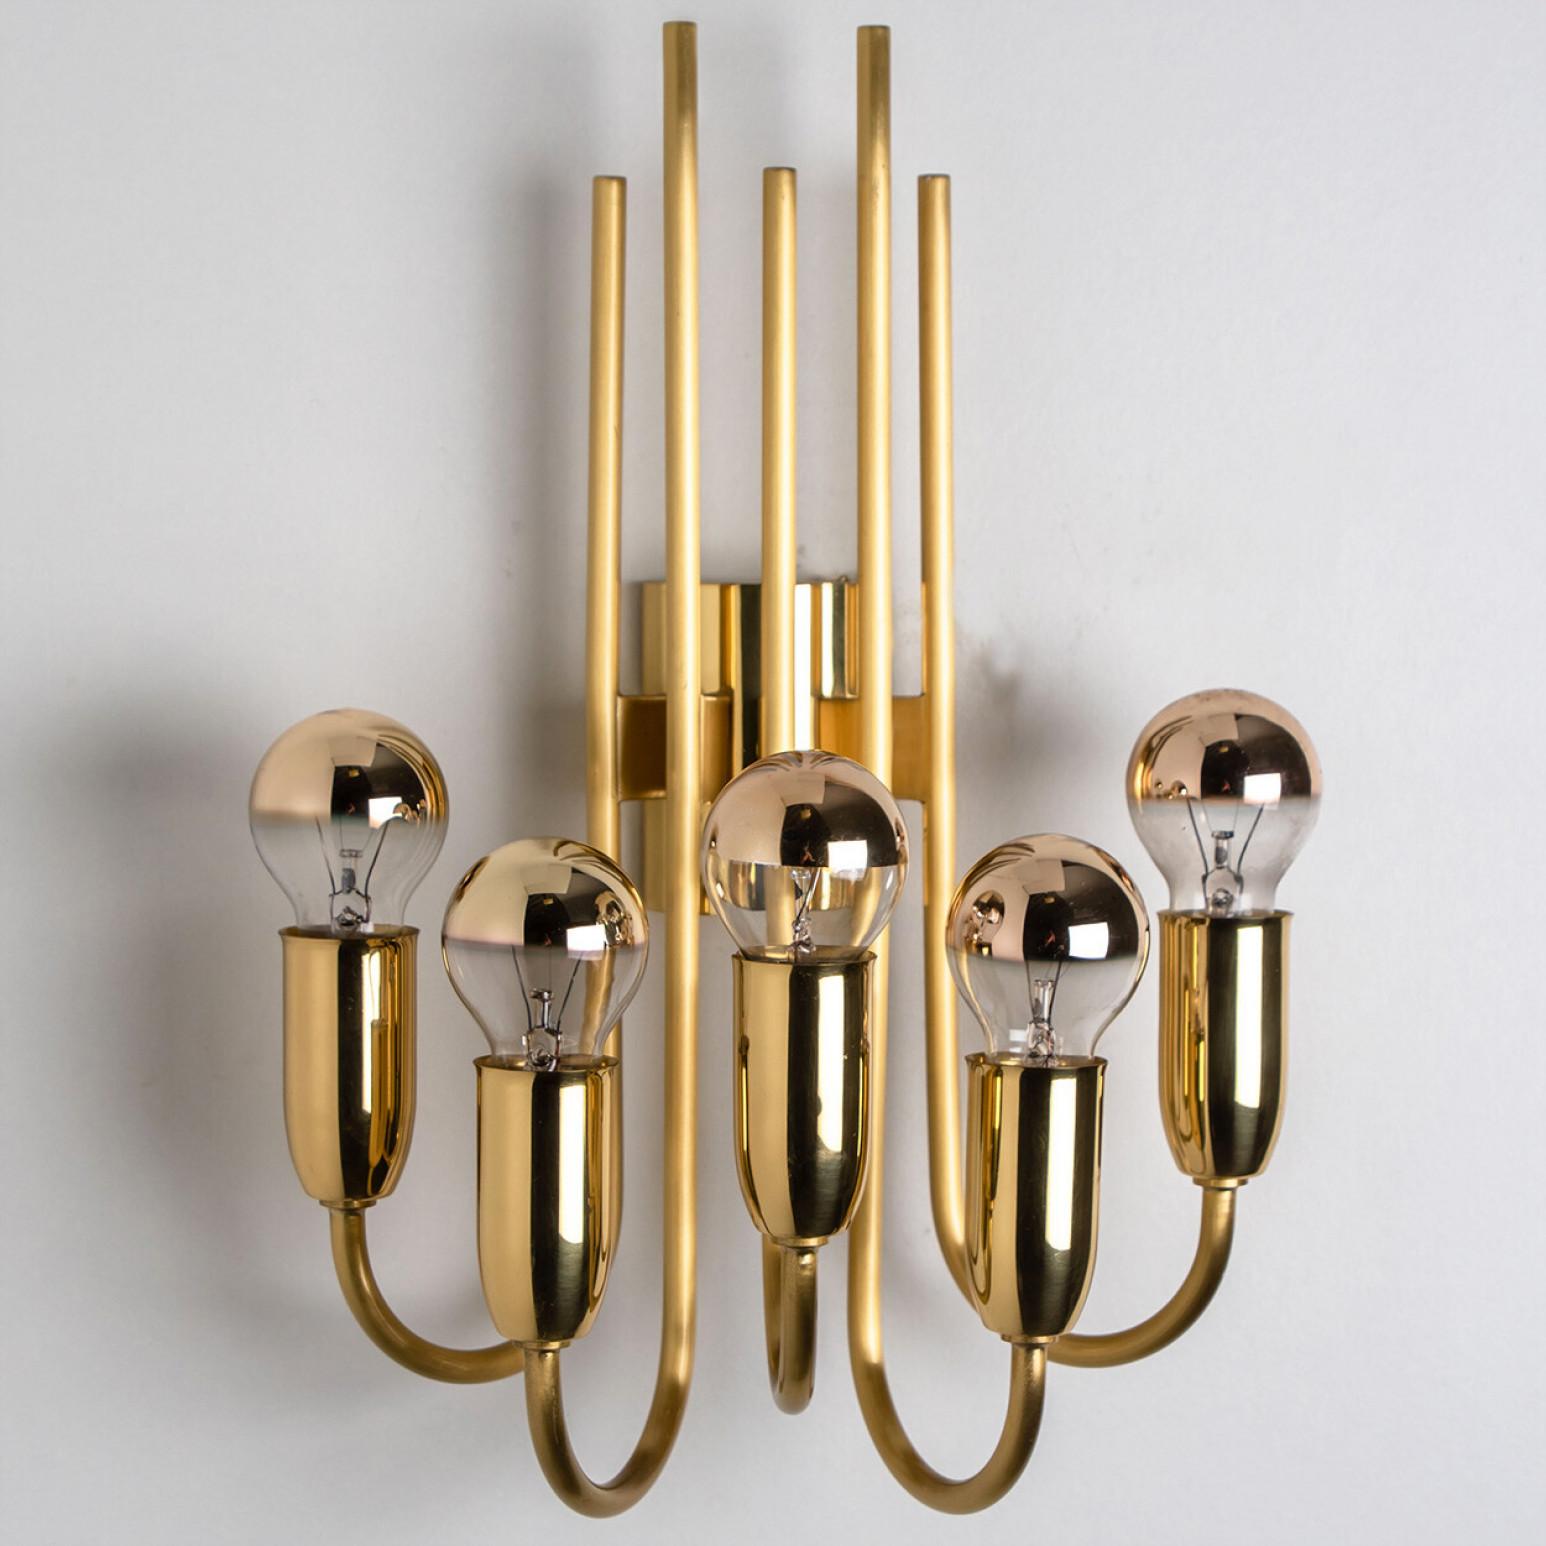 Pair of Beautiful gold and brass wall light in the style of  Florian Schulz, Germany, Europe. Design period: 1970-1979.

Five glass spheres pointed upwards, each supported by a curved brass rod. The spheres are supported at different heights,